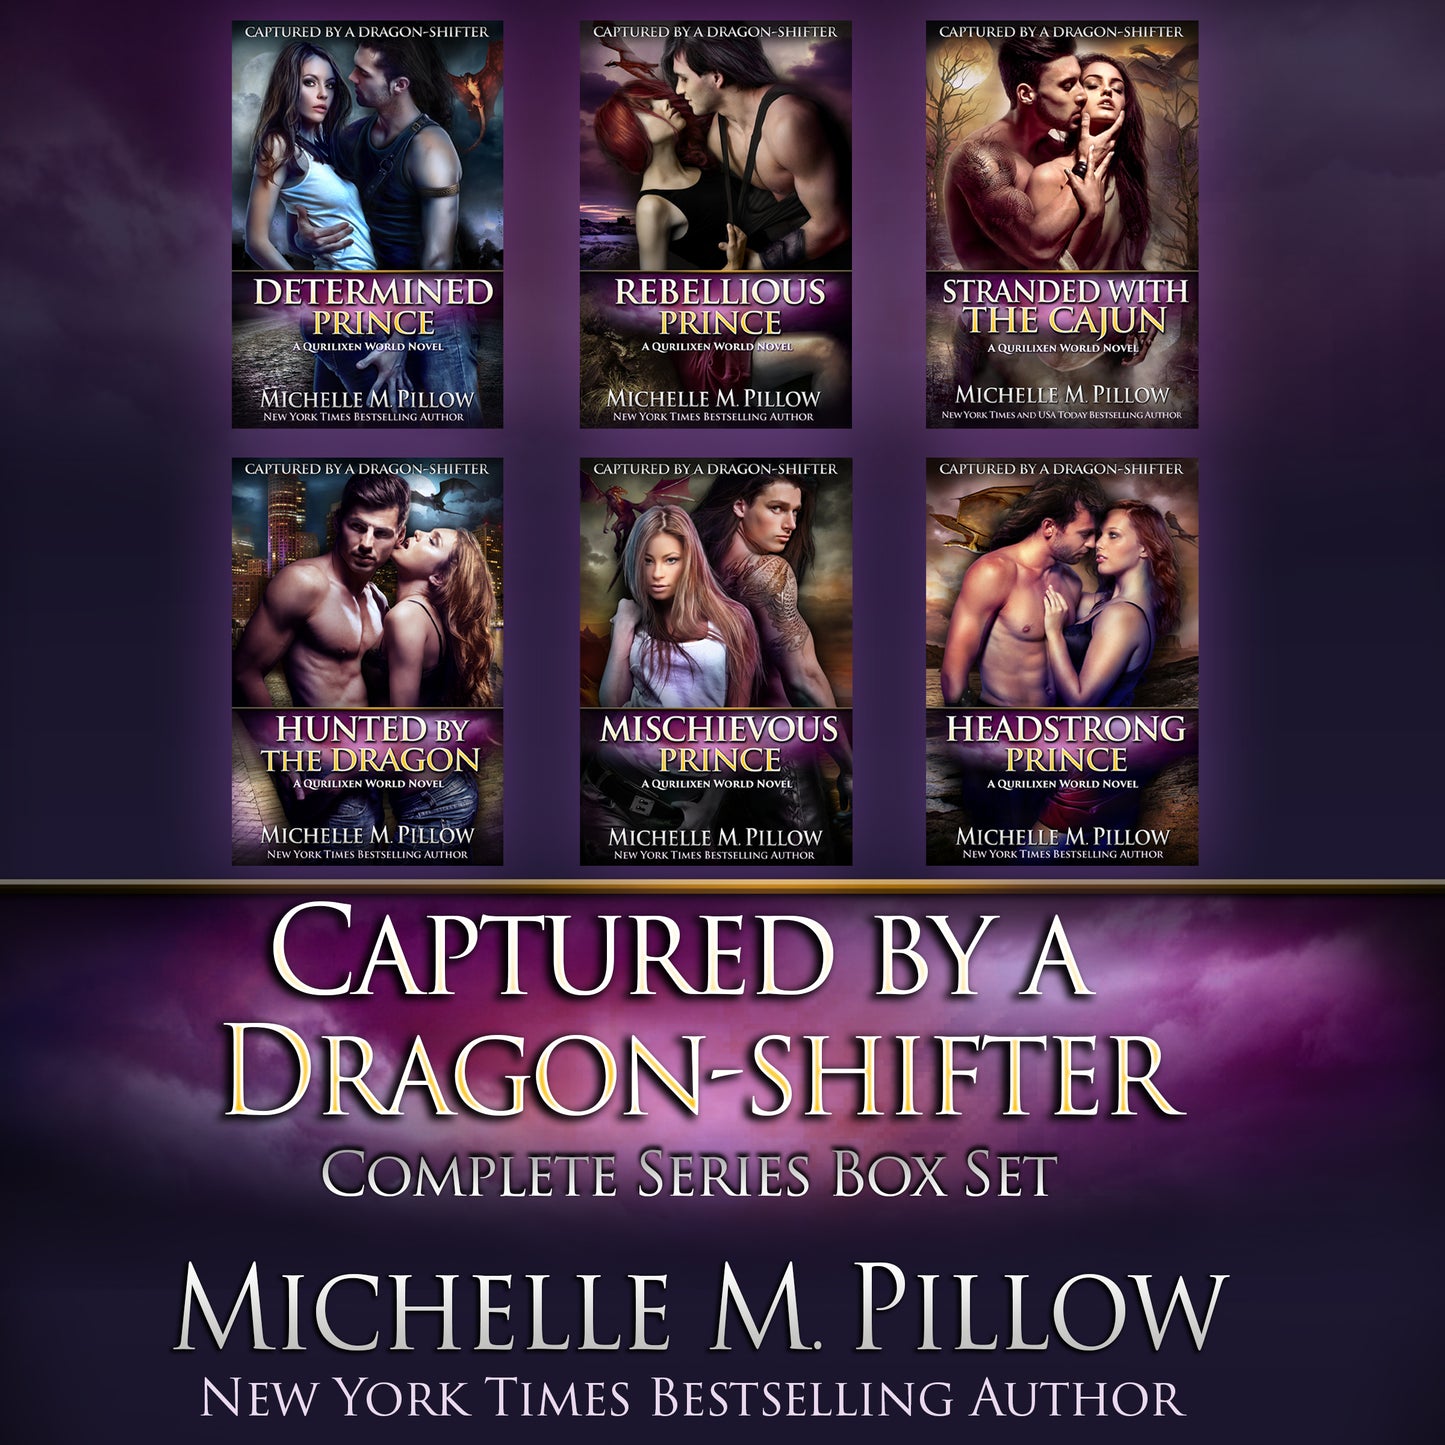 AUDIO: Captured by a Dragon-Shifter Complete 6 Book Digital Box Set